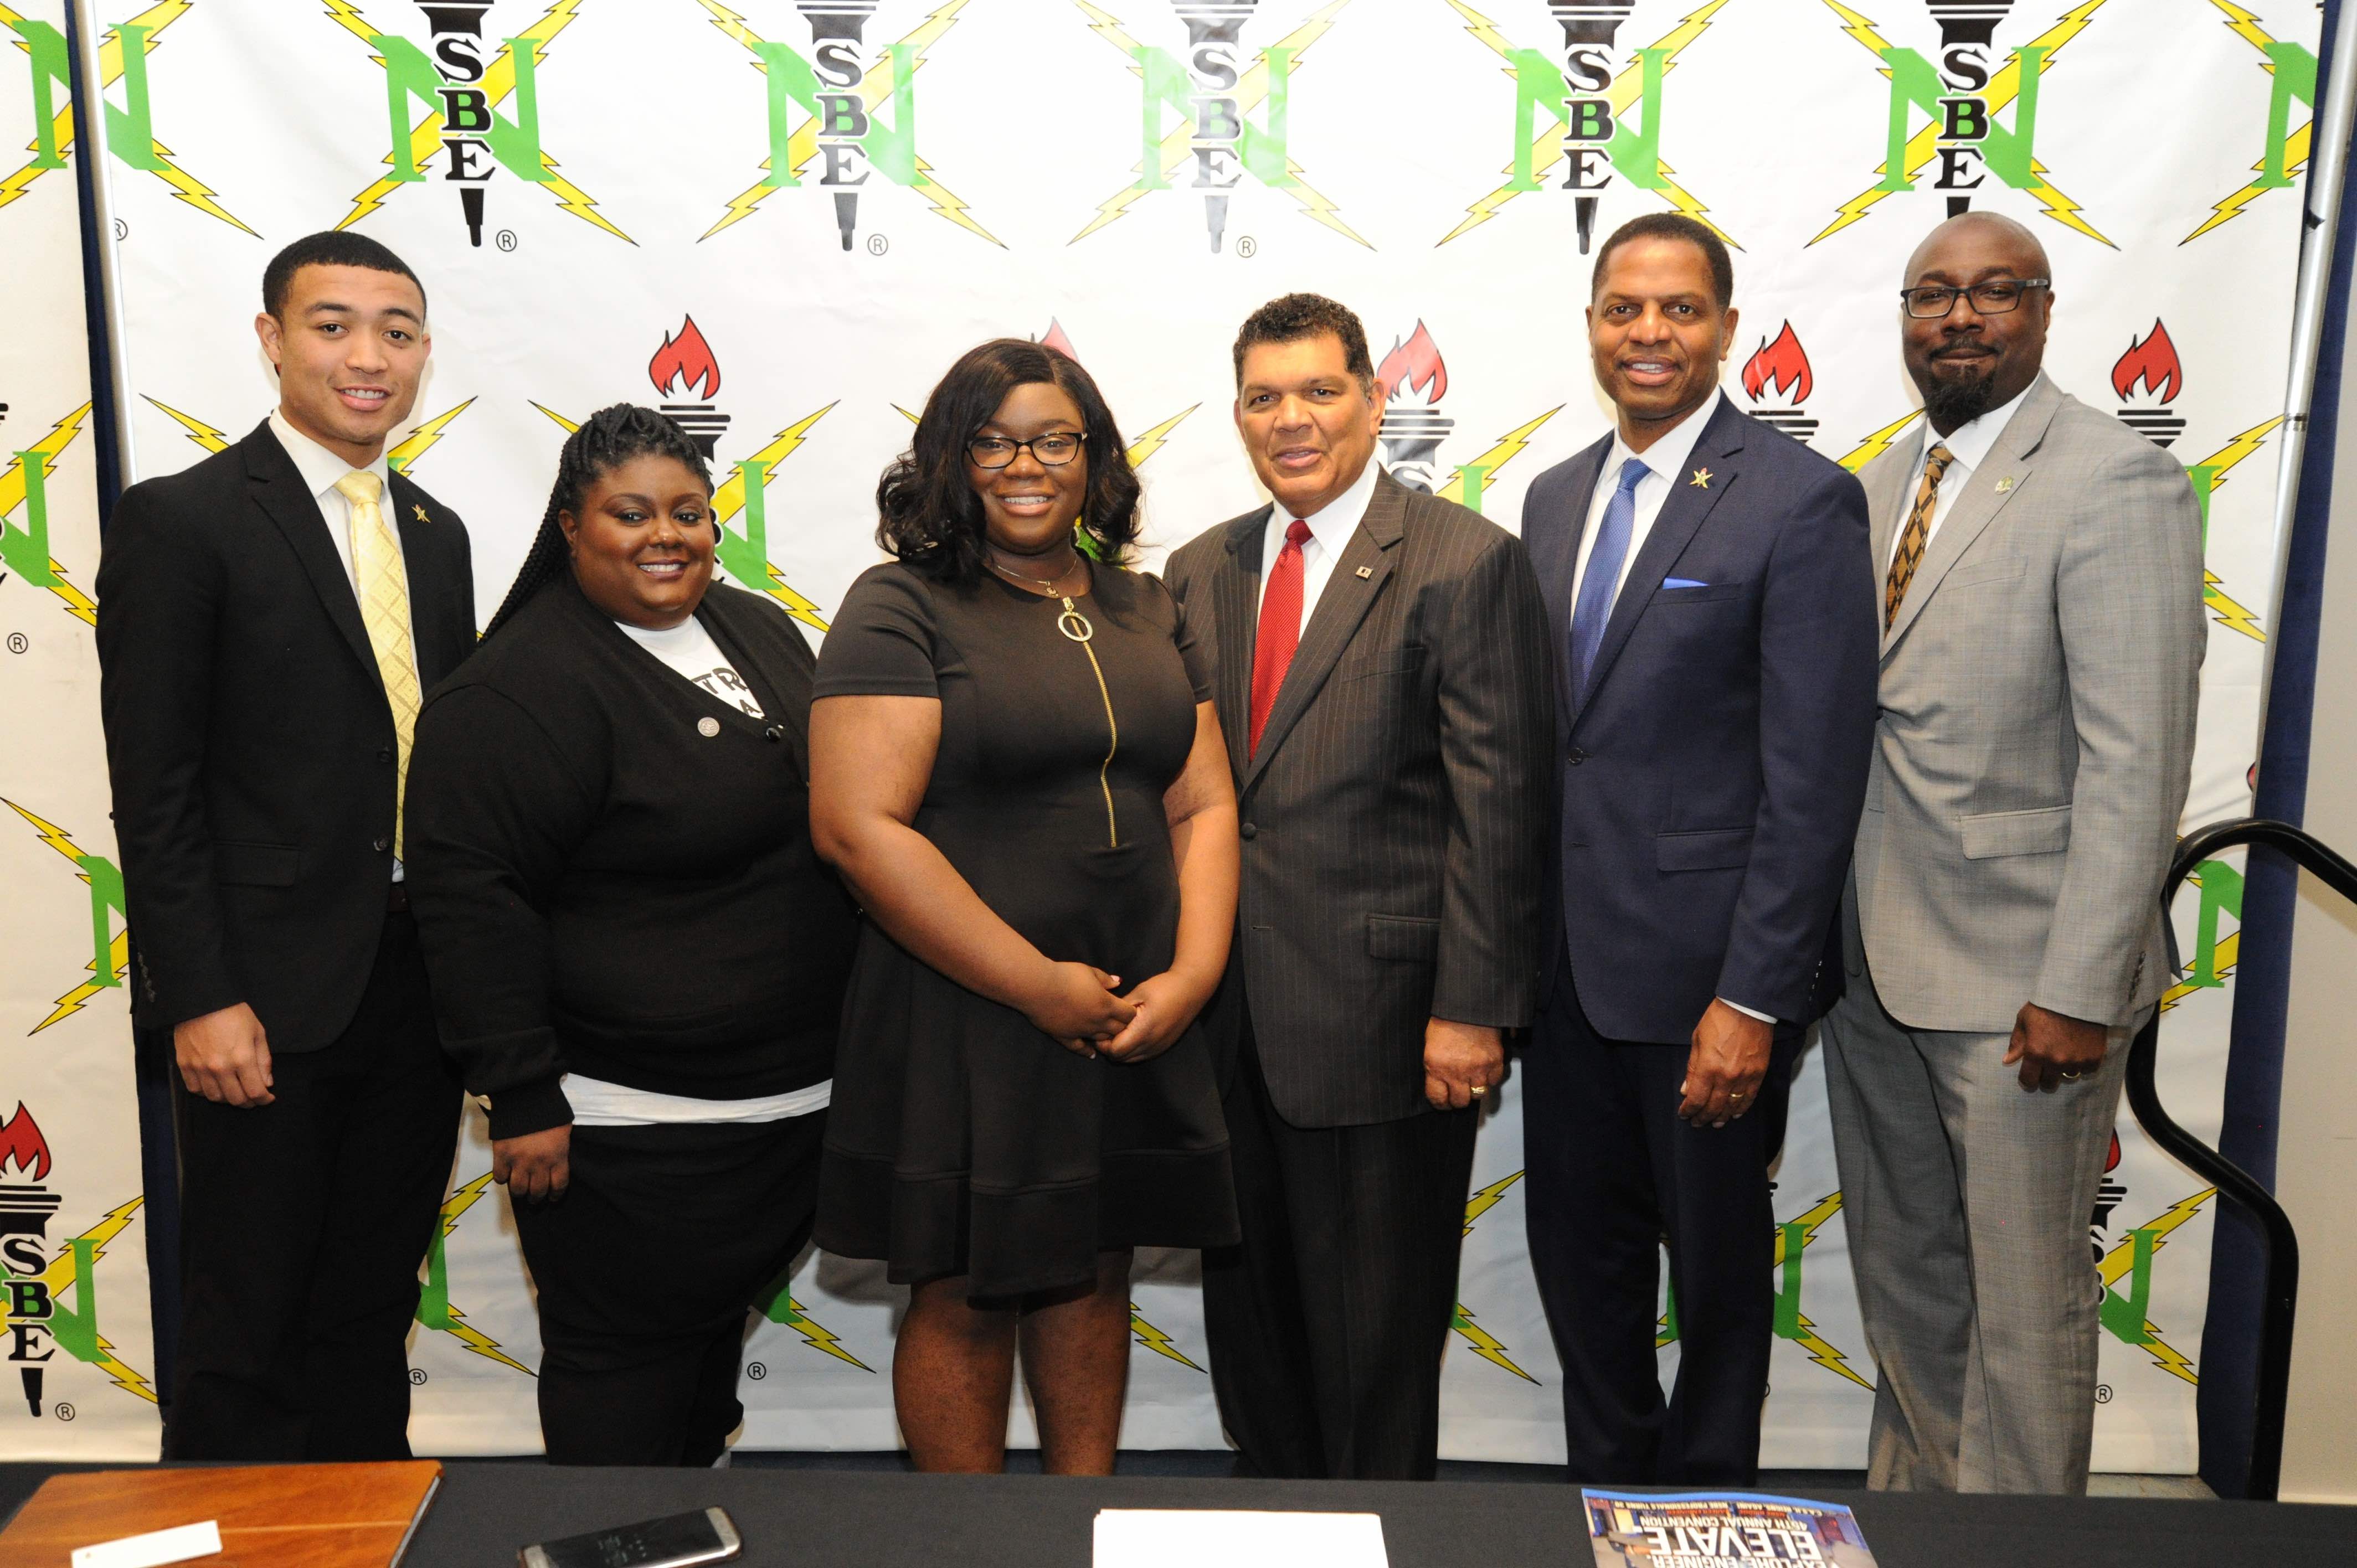 From left to right: Julius Page, National Secretary; Alanna Tremble-Winfrey, Annual Convention Planning Committee Chair; Niasia Williams, National Chair; Larry Alexander, President & CEO of the Detroit Metro Convention & Visitors Bureau; Karl Reid, Executive Director; Anthony B. Murphy, National Professionals Chair